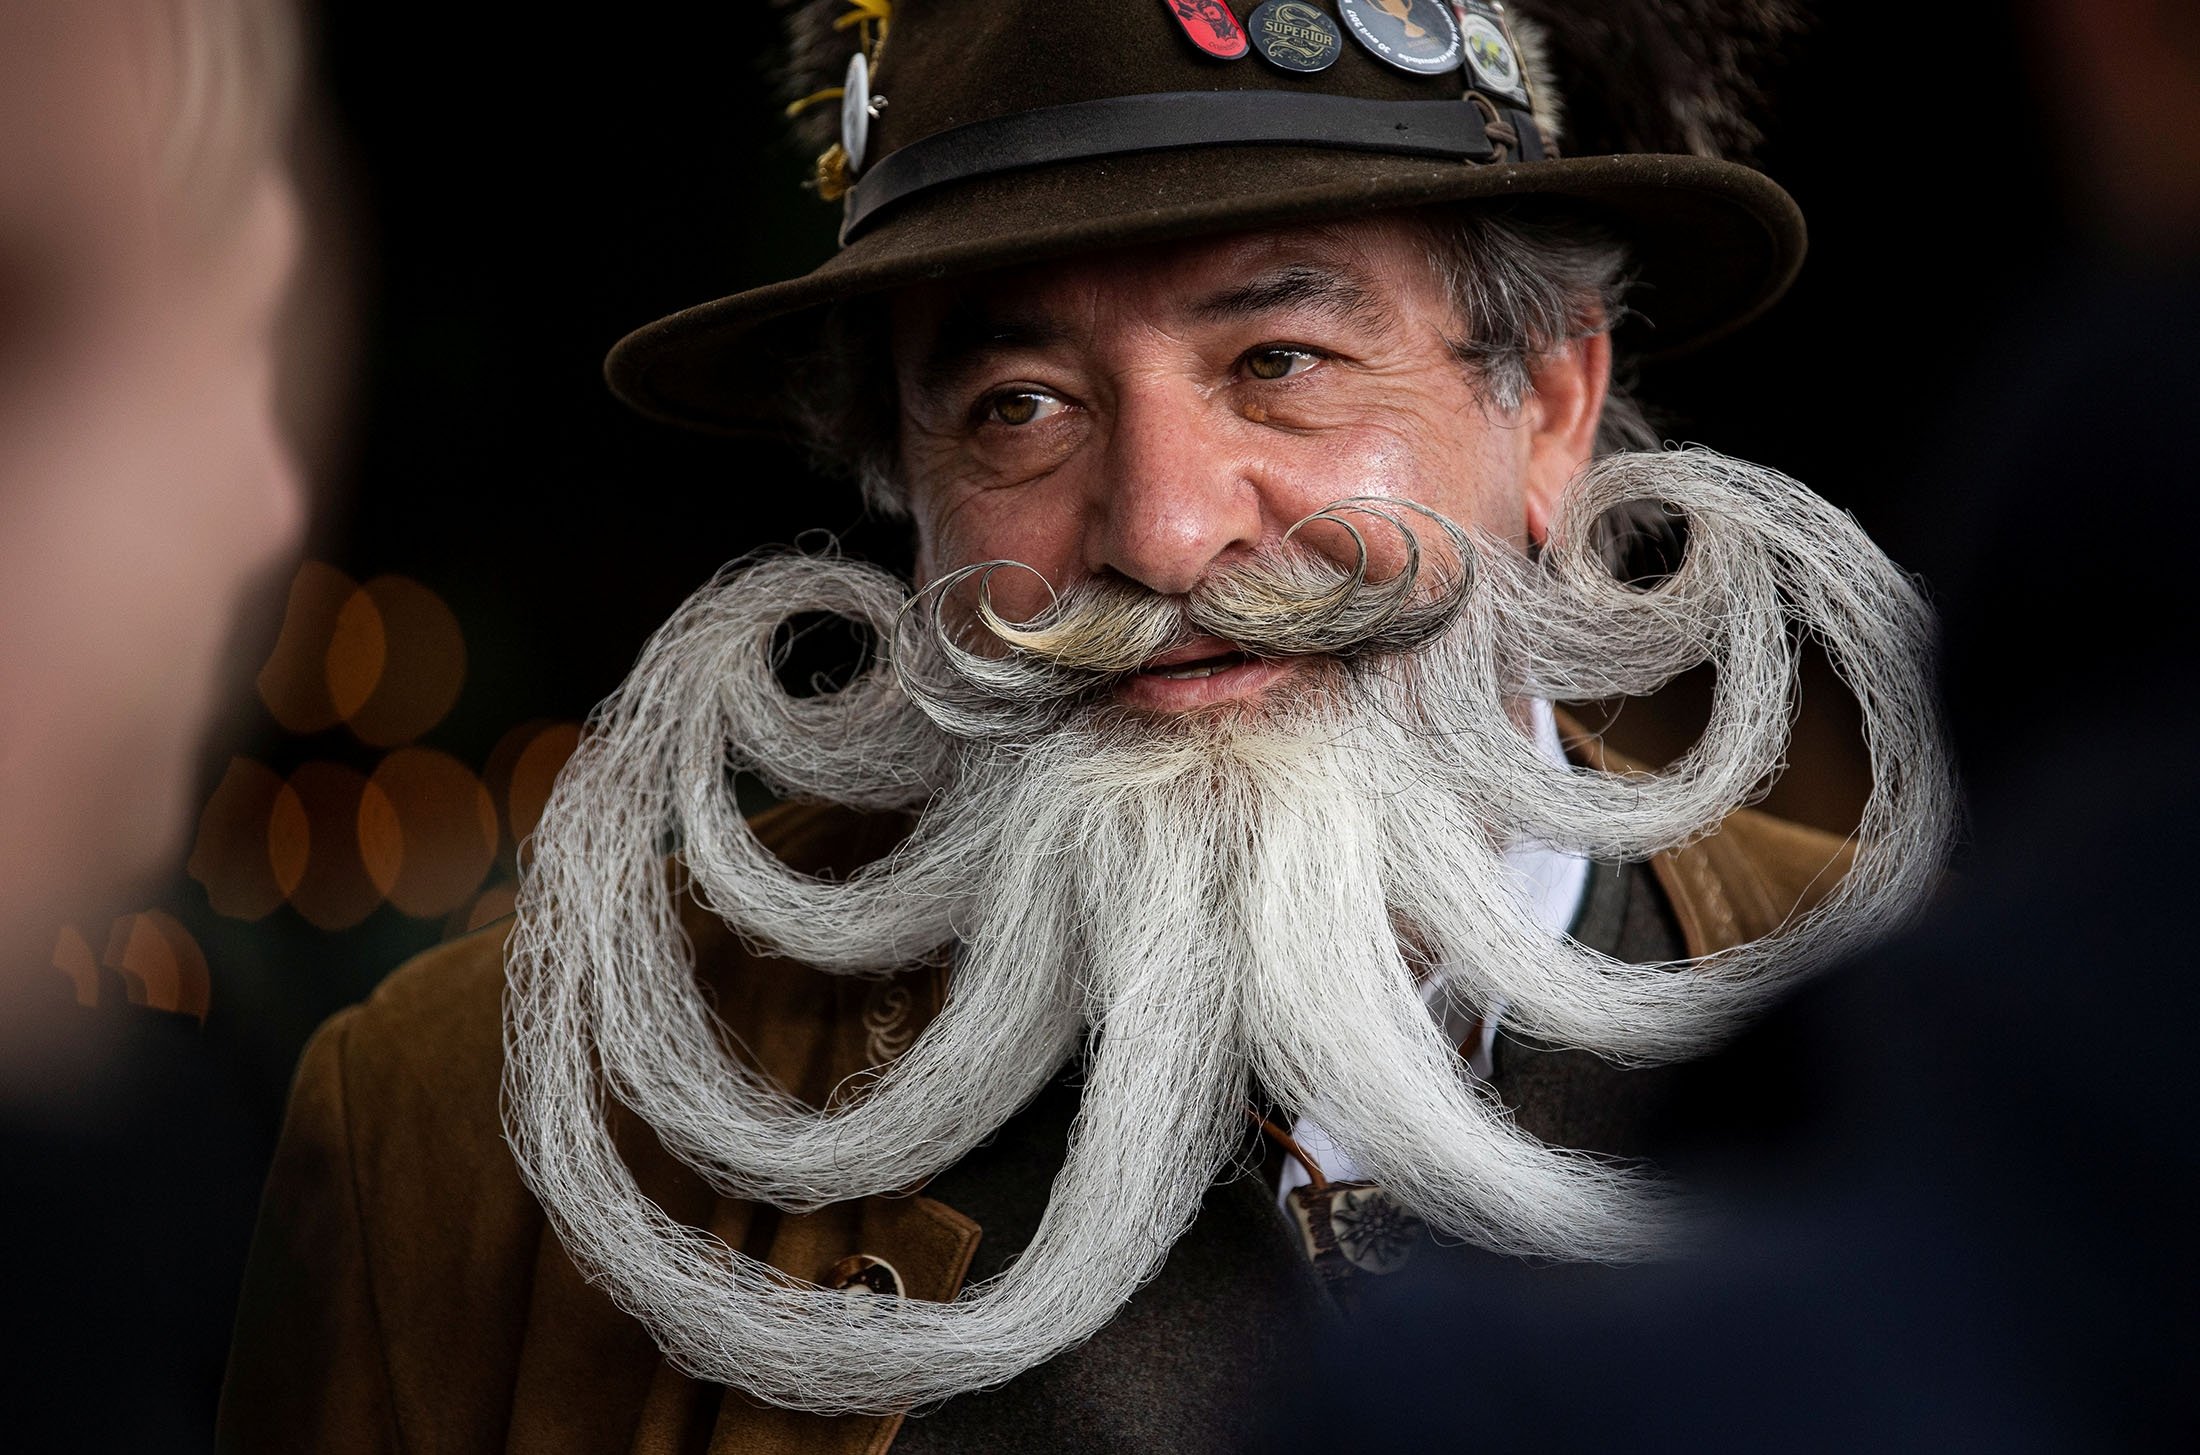 beards, majestic mustaches compete at German championship | Daily Sabah